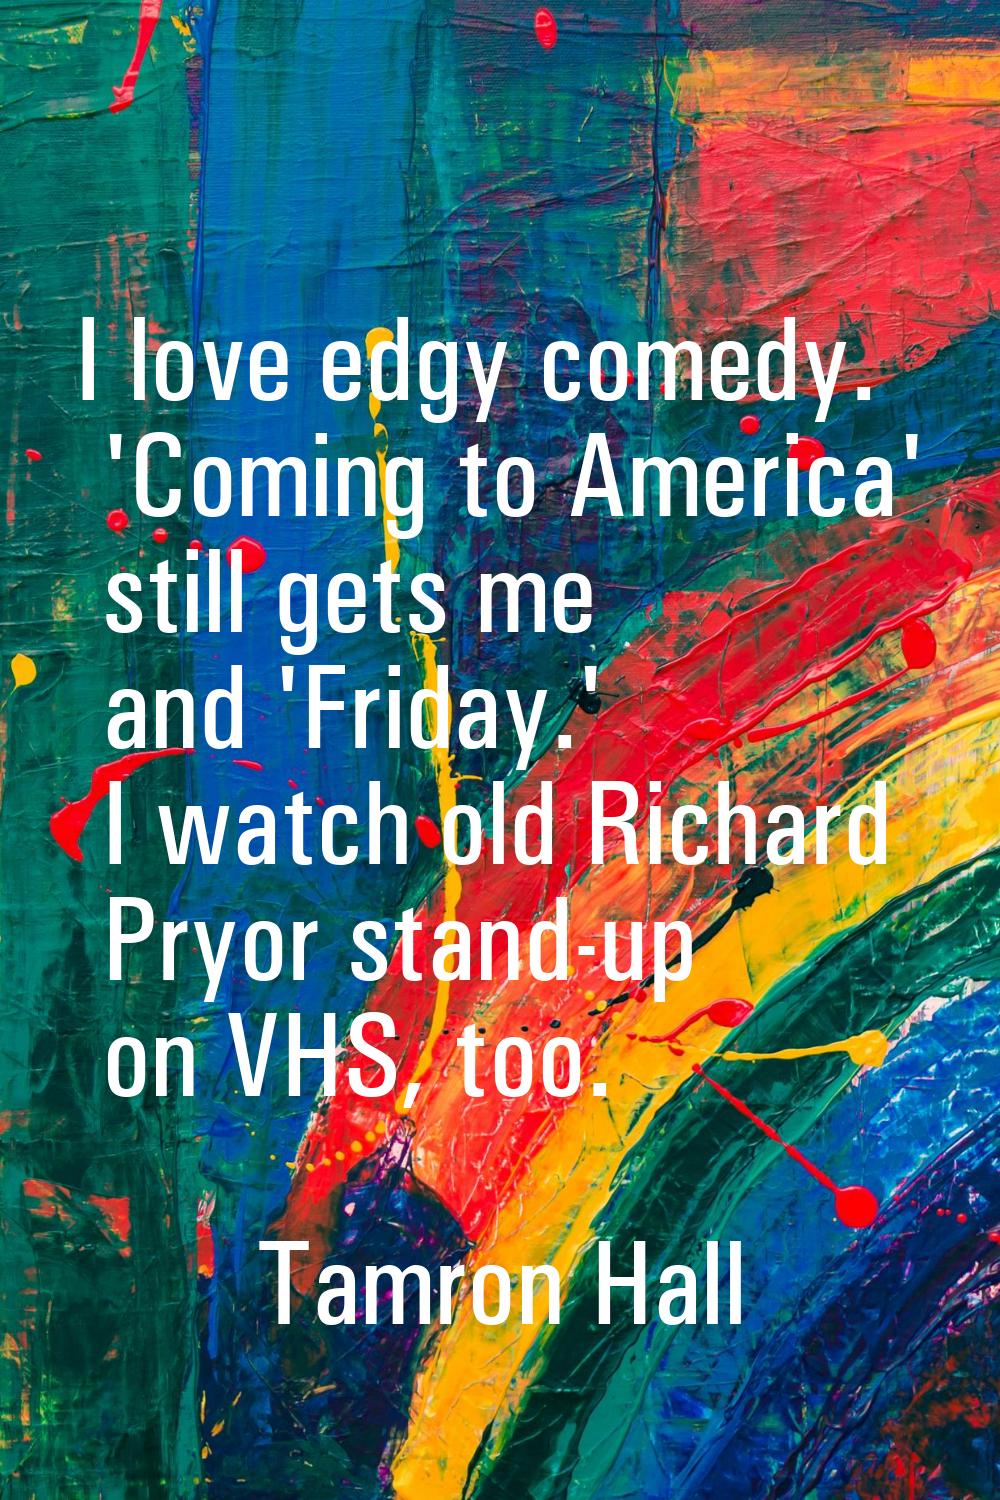 I love edgy comedy. 'Coming to America' still gets me and 'Friday.' I watch old Richard Pryor stand